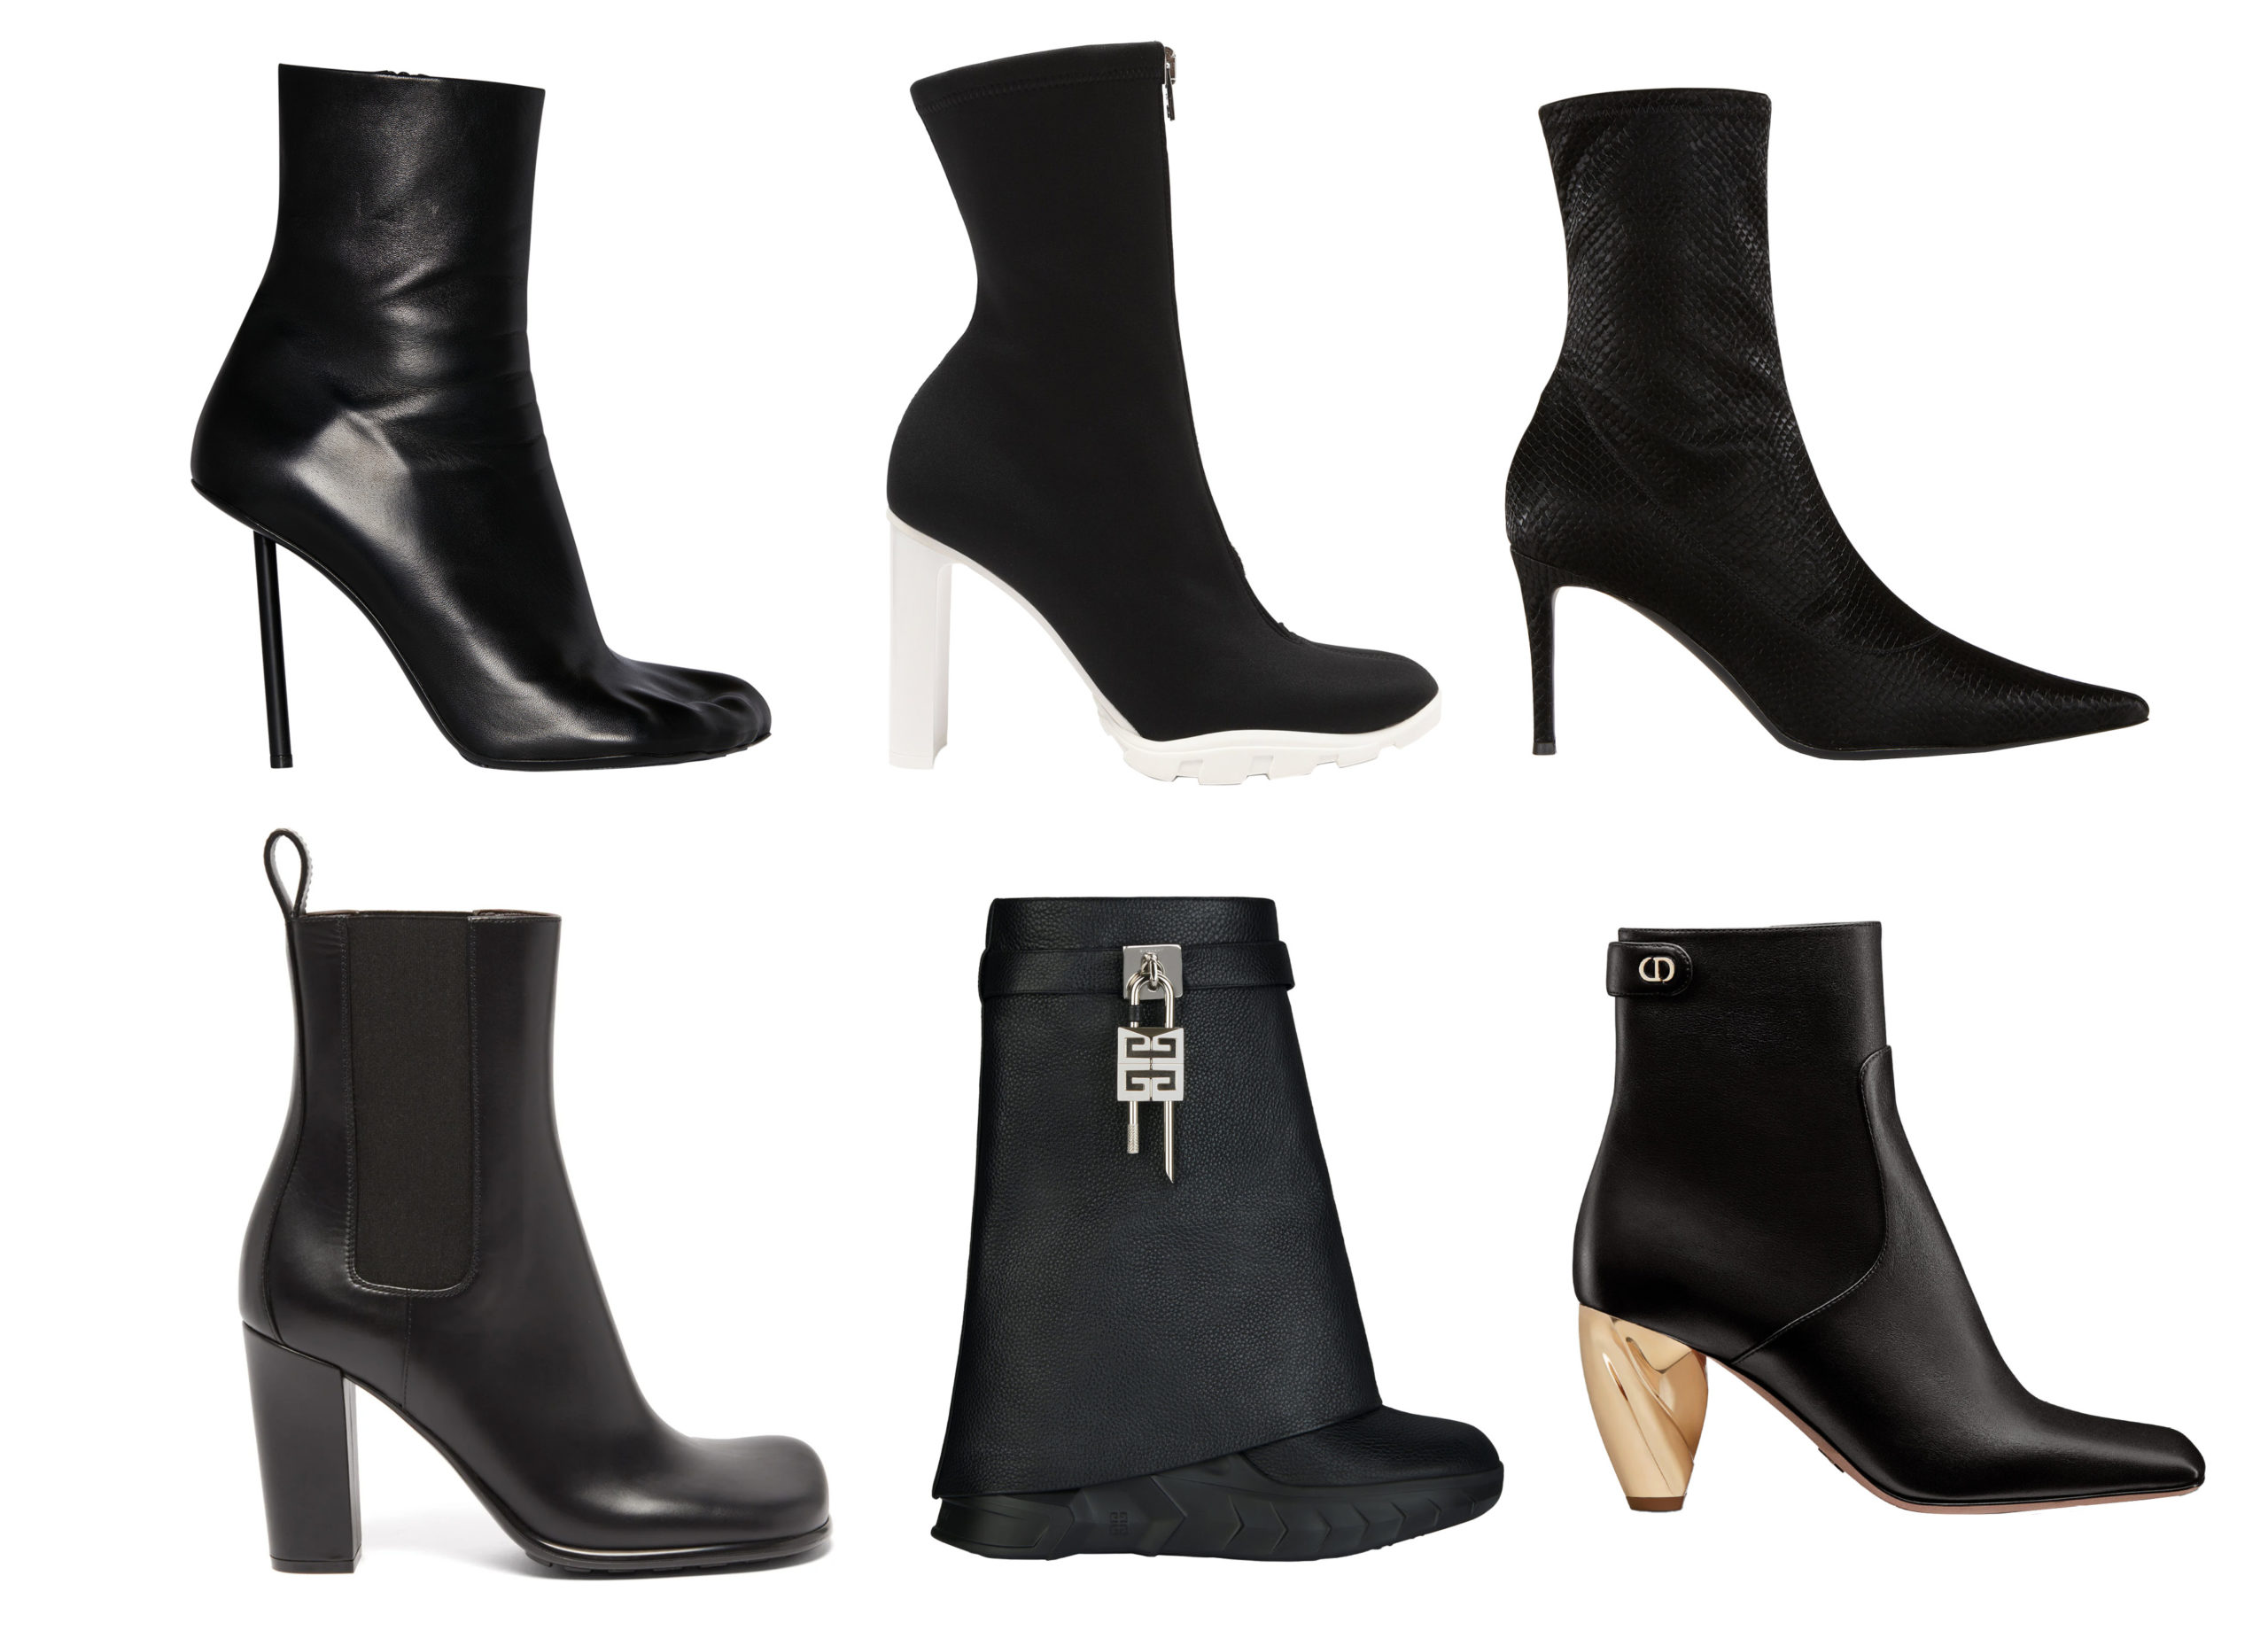 This season’s must-have heeled combat ankle boots take centre stage